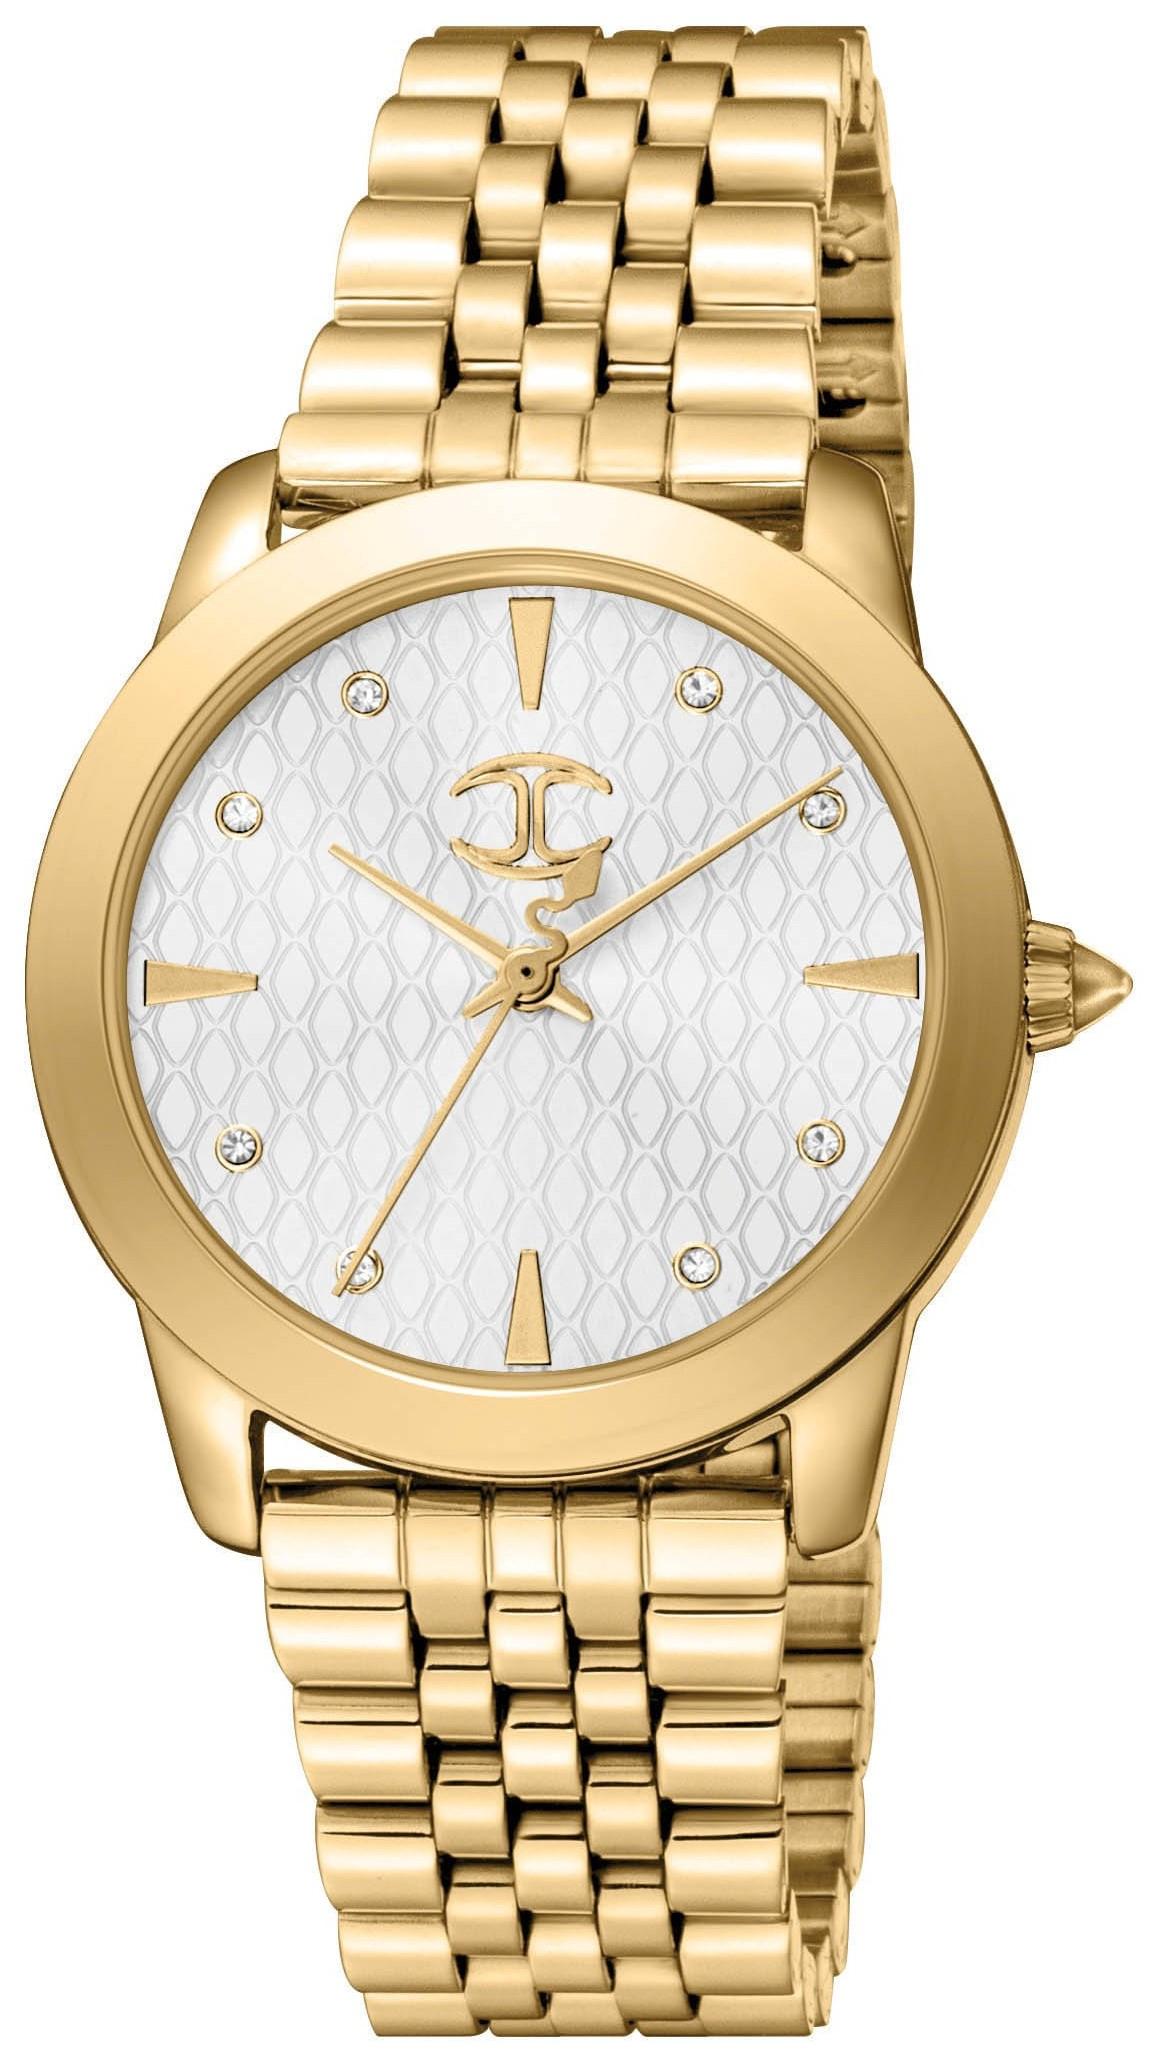 JUST CAVALLI Donna - JC1L211M0255, Gold case with Stainless Steel Bracelet